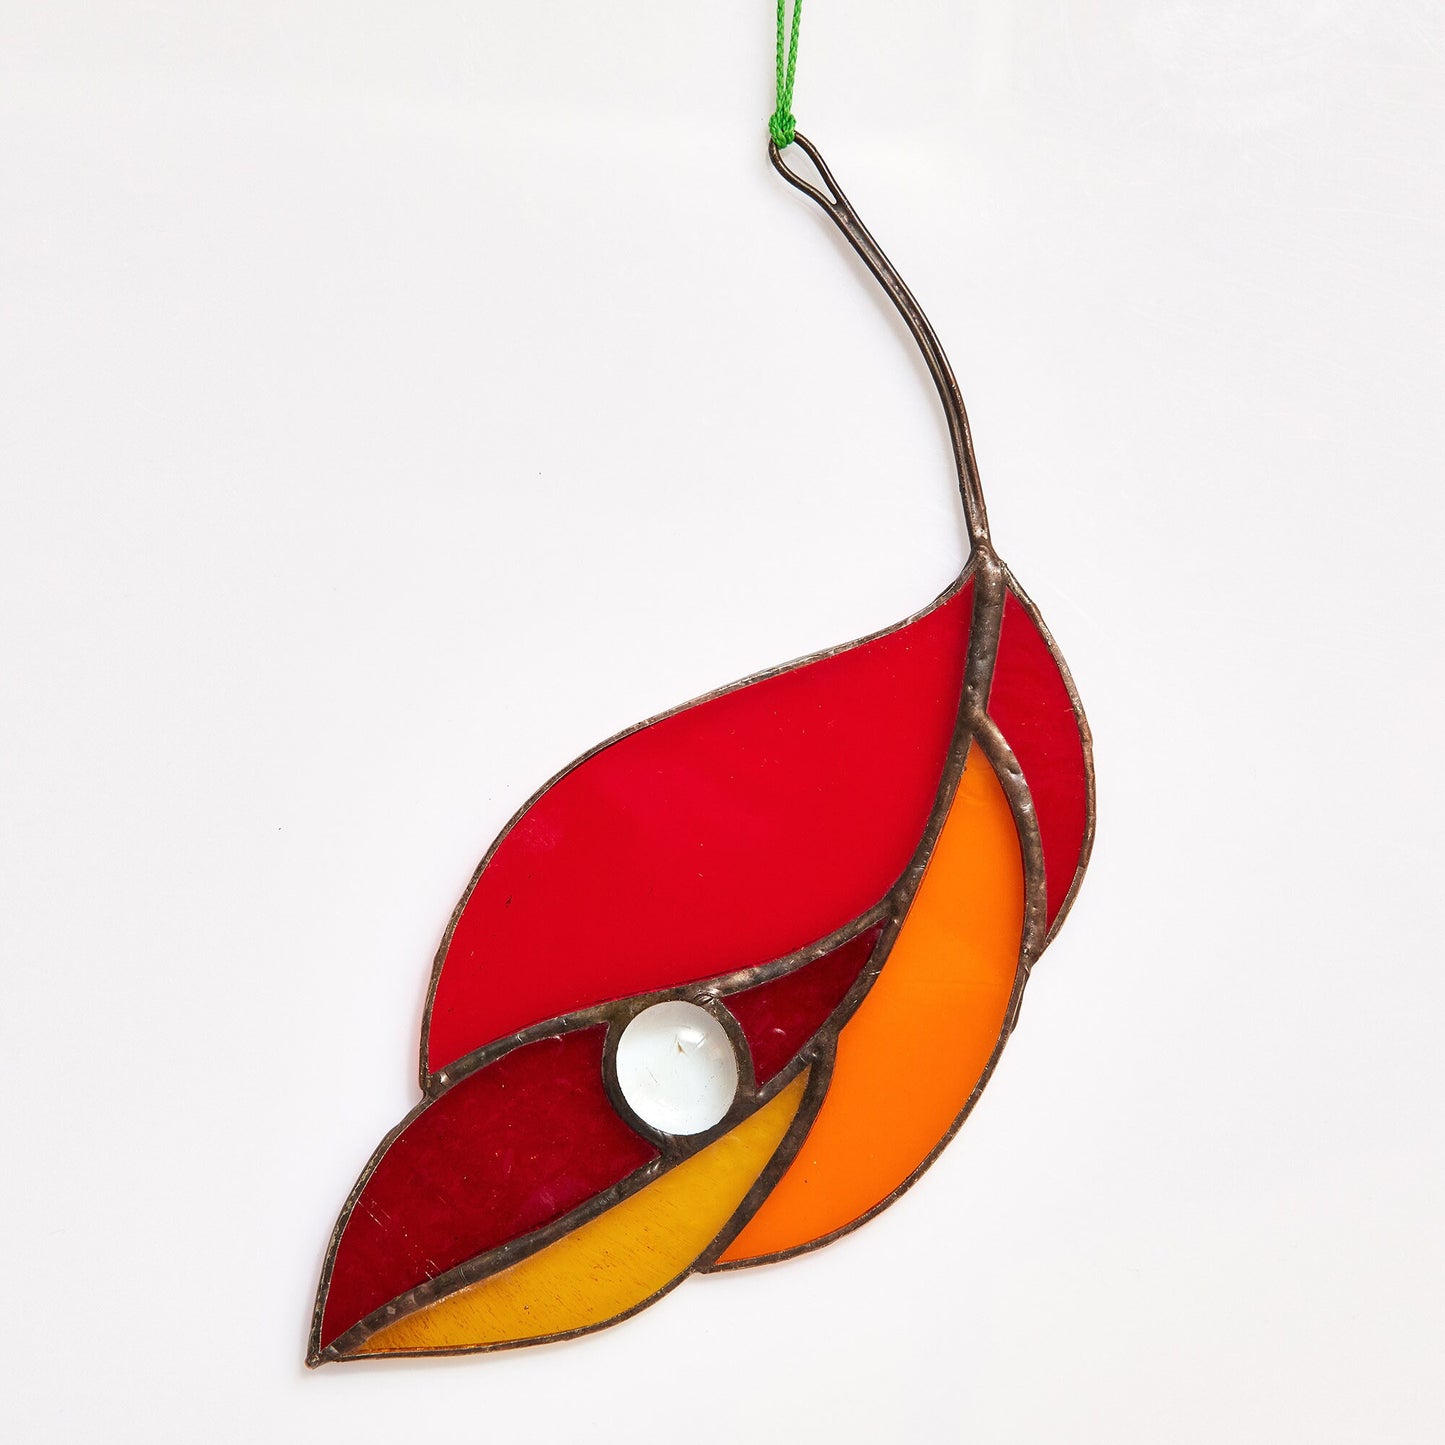 Ash tree Leaf Stained Glass Suncatcher